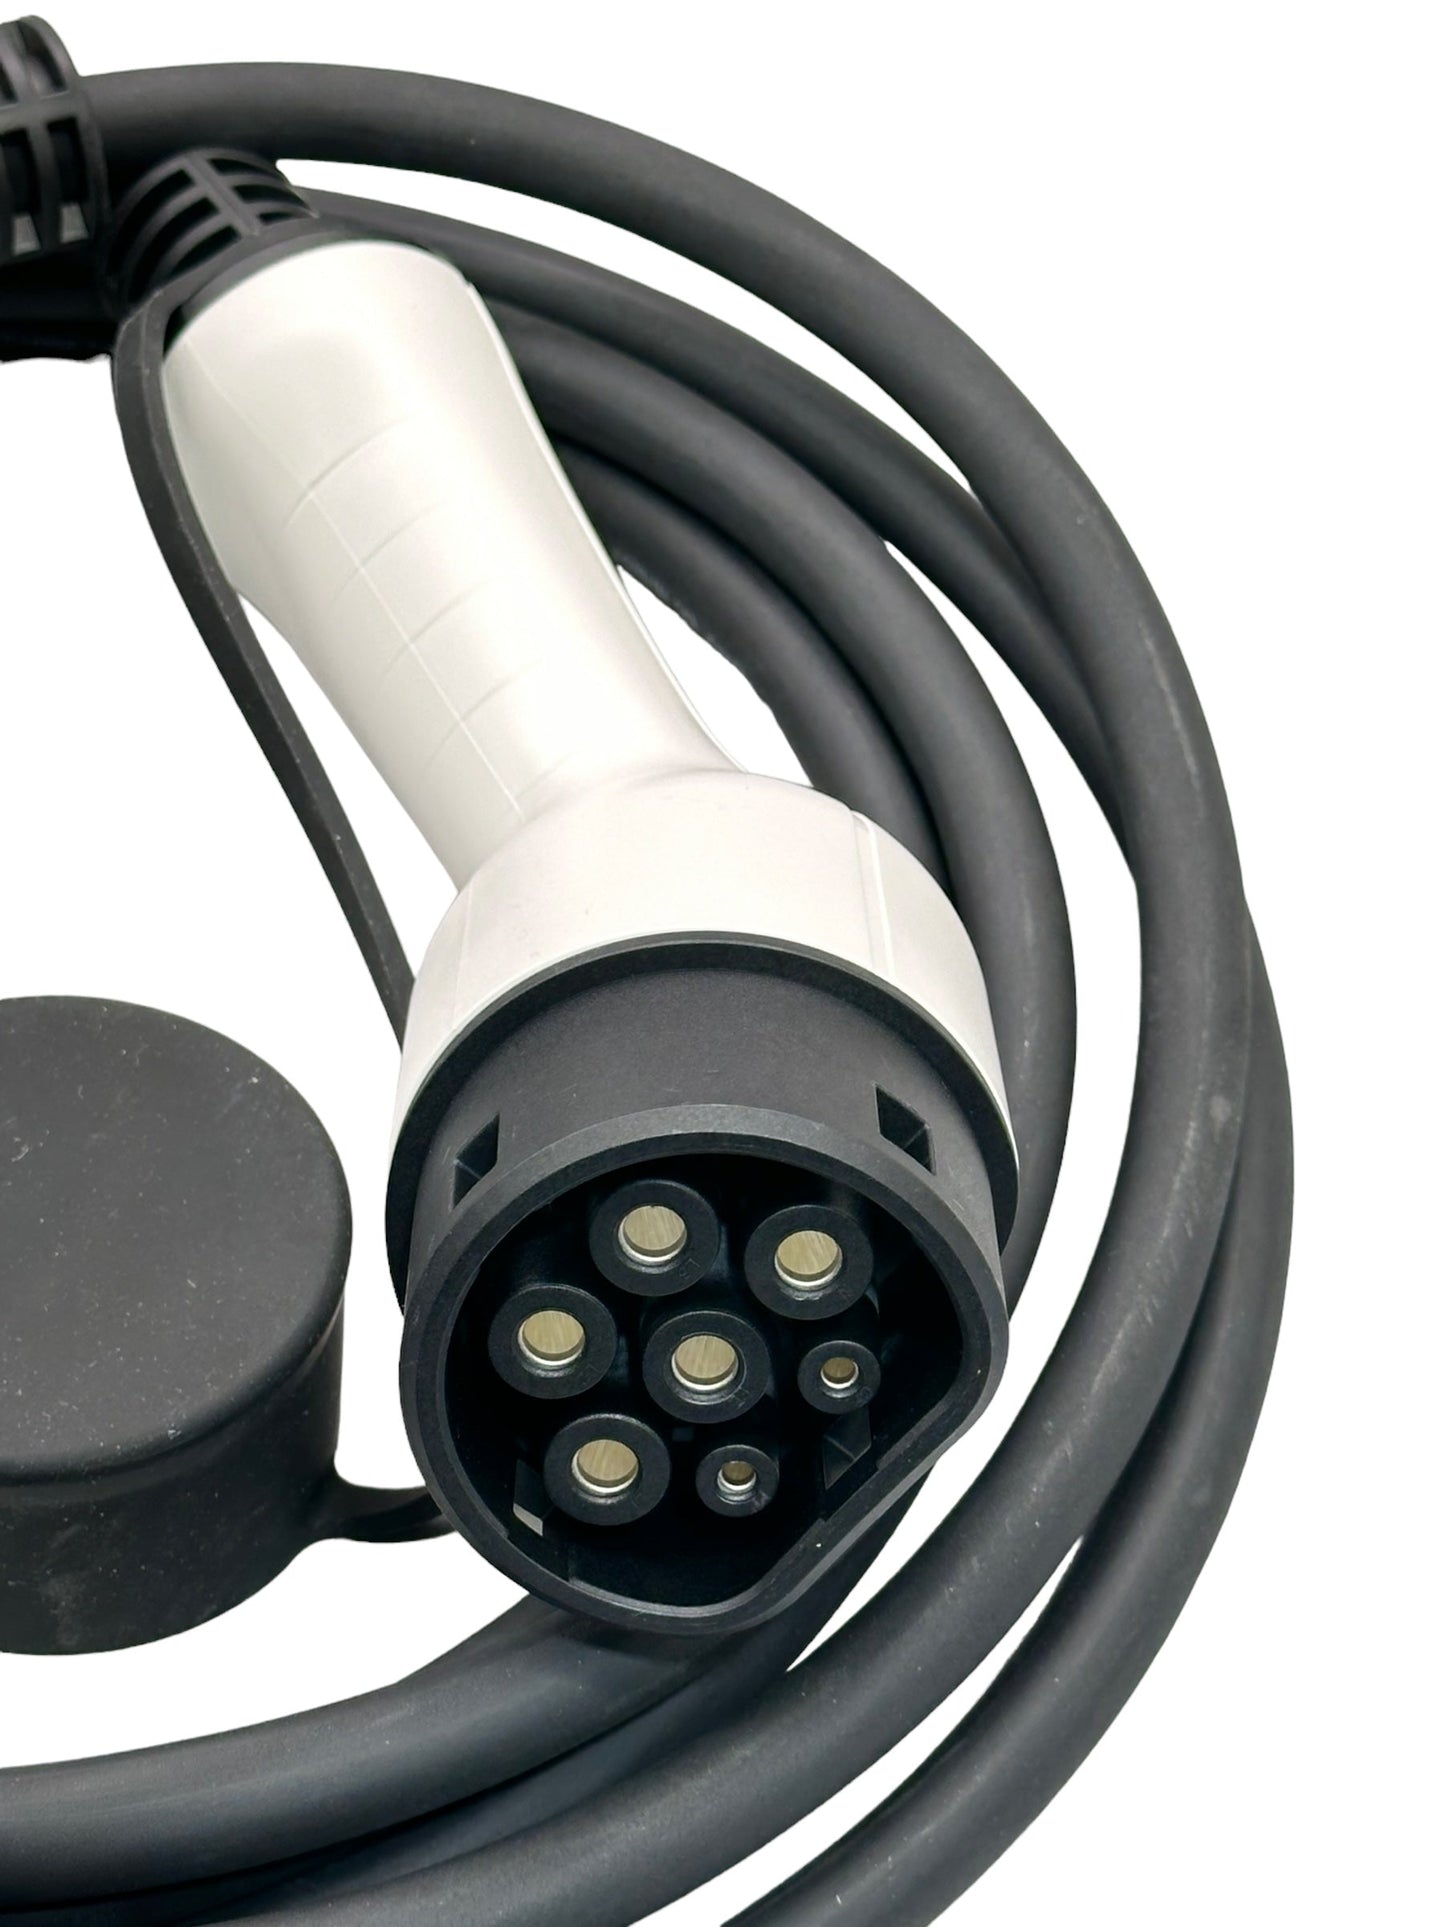 5 meter charging cable 22 KW Type2 for electric cars and hybrid 22KW - Cable length 5m - TÜV &amp; CE &amp; DEKRA tested - With bag